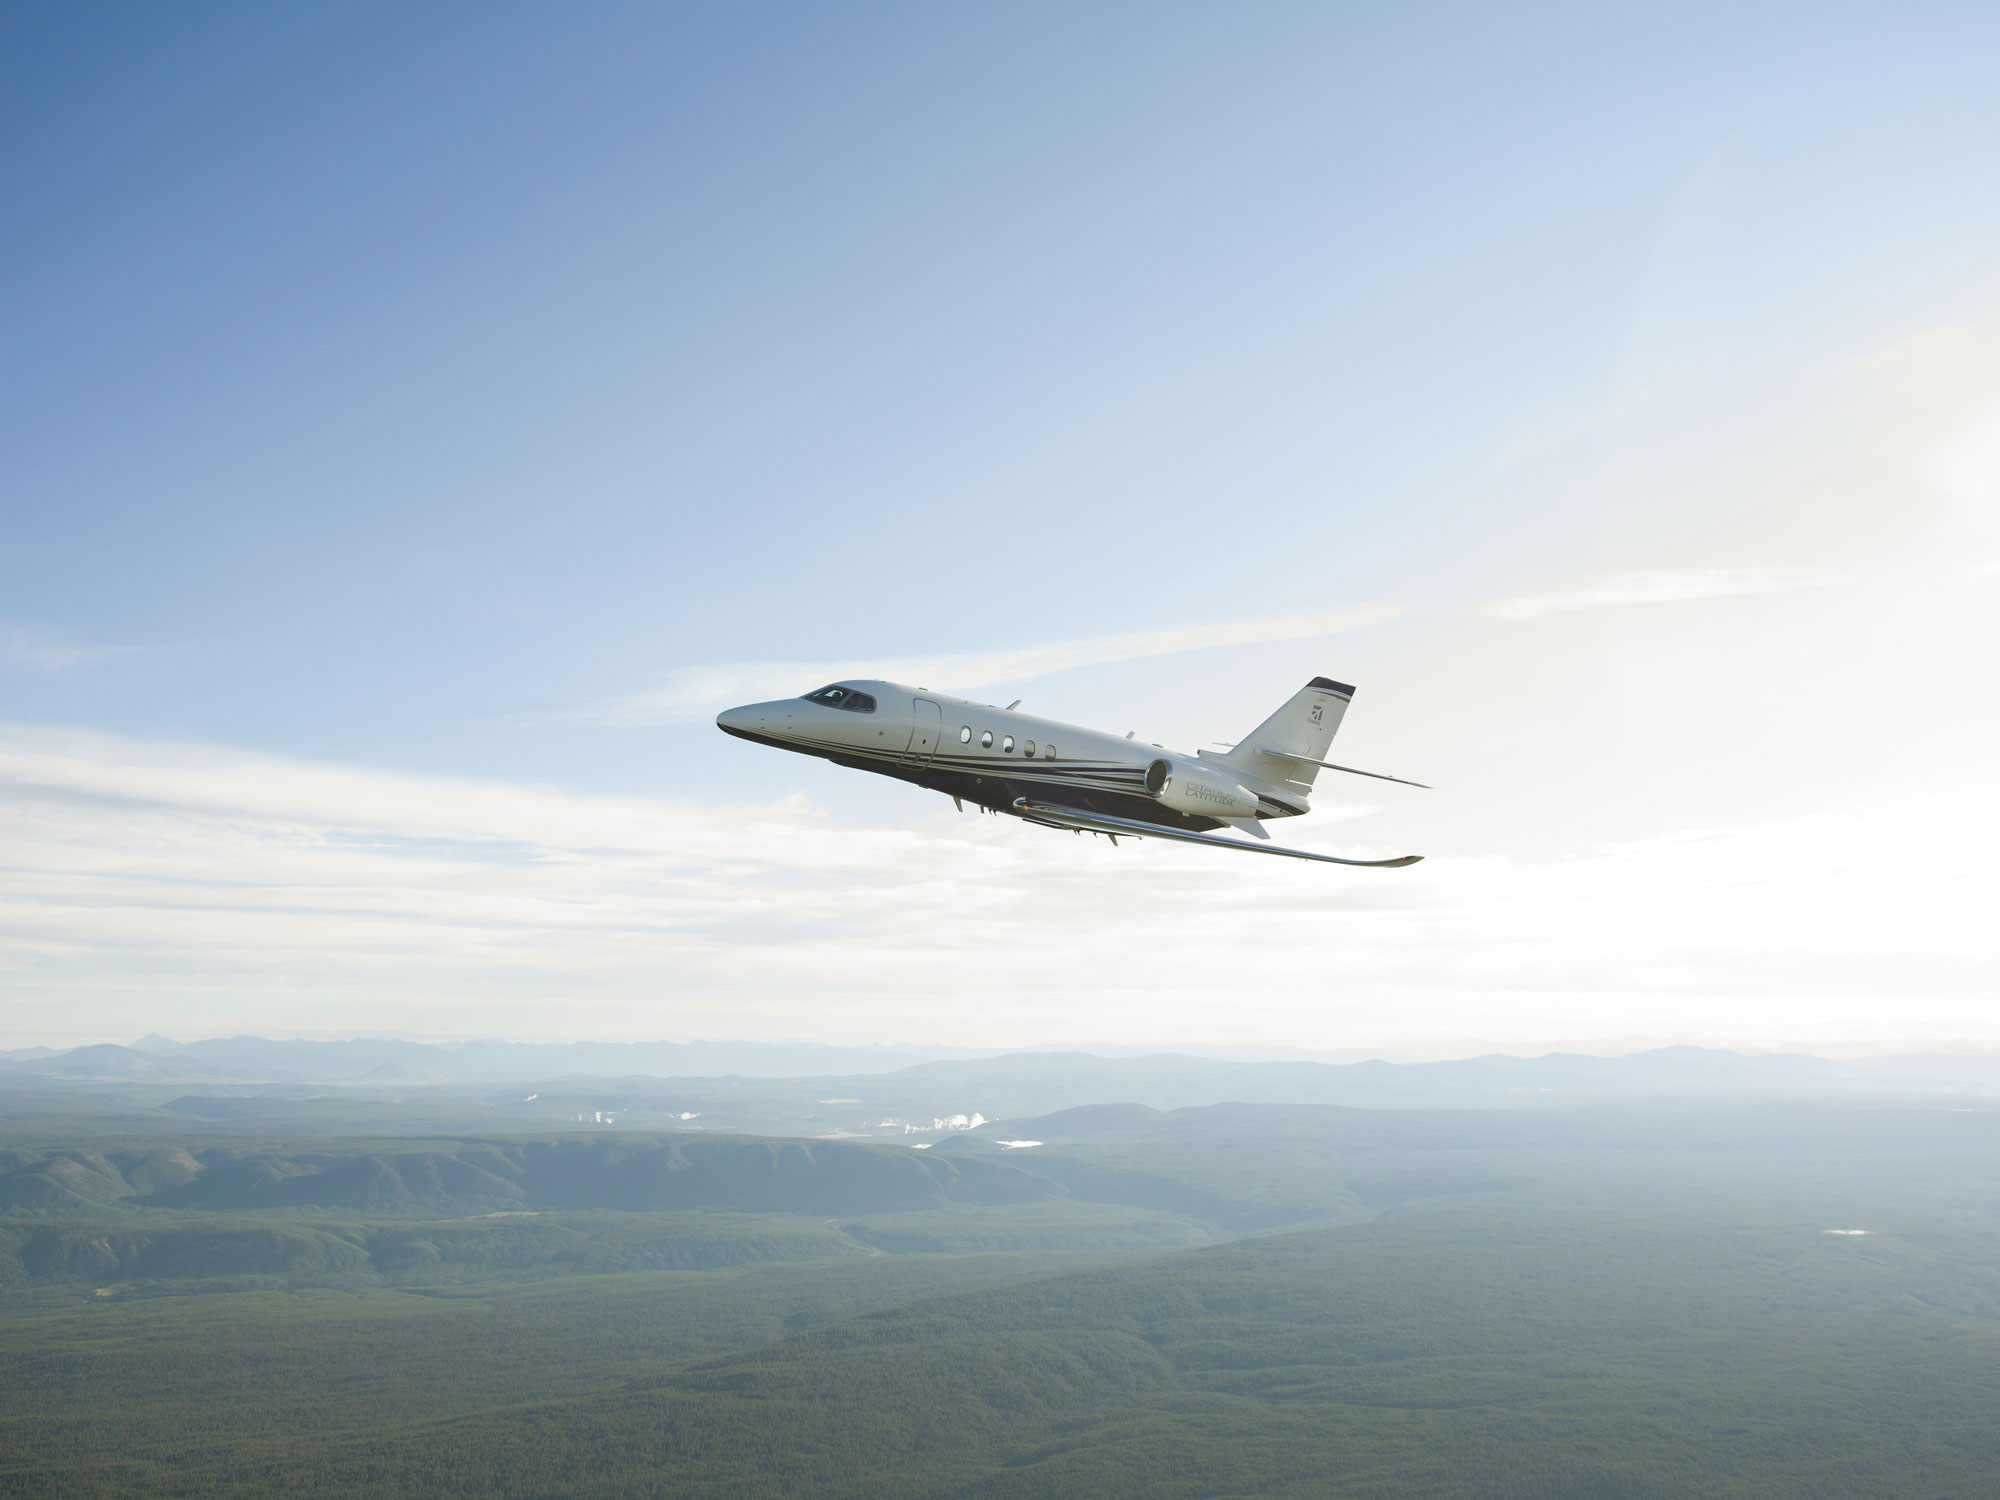 Textron Aviation leads in business and general aviation aircraft deliveries in 2020